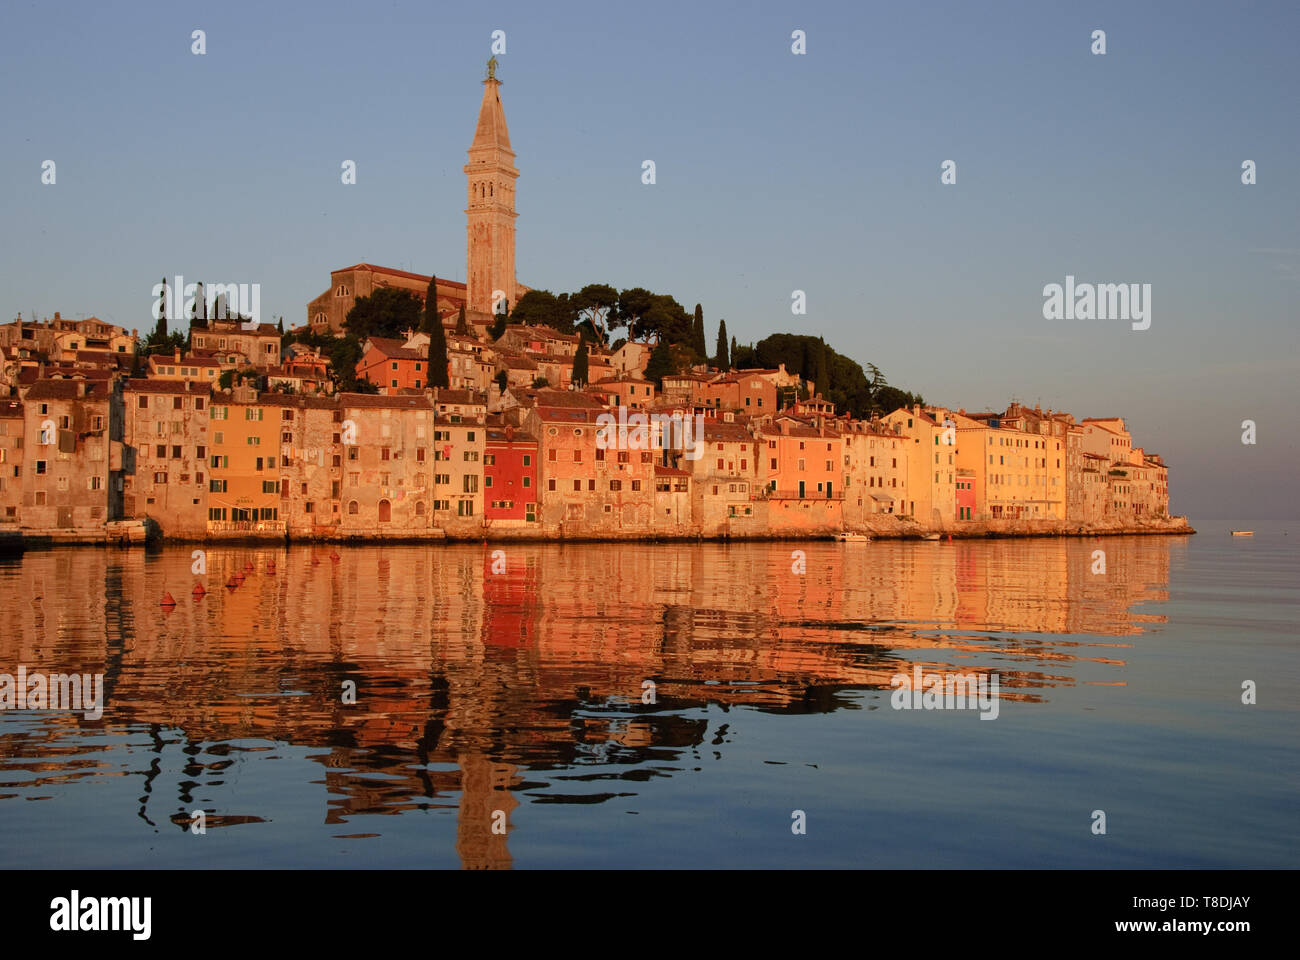 Rovinj, an ancient sea port once governed by the Republic of Venice, is a great family friendly destination off the beaten path. Stock Photo